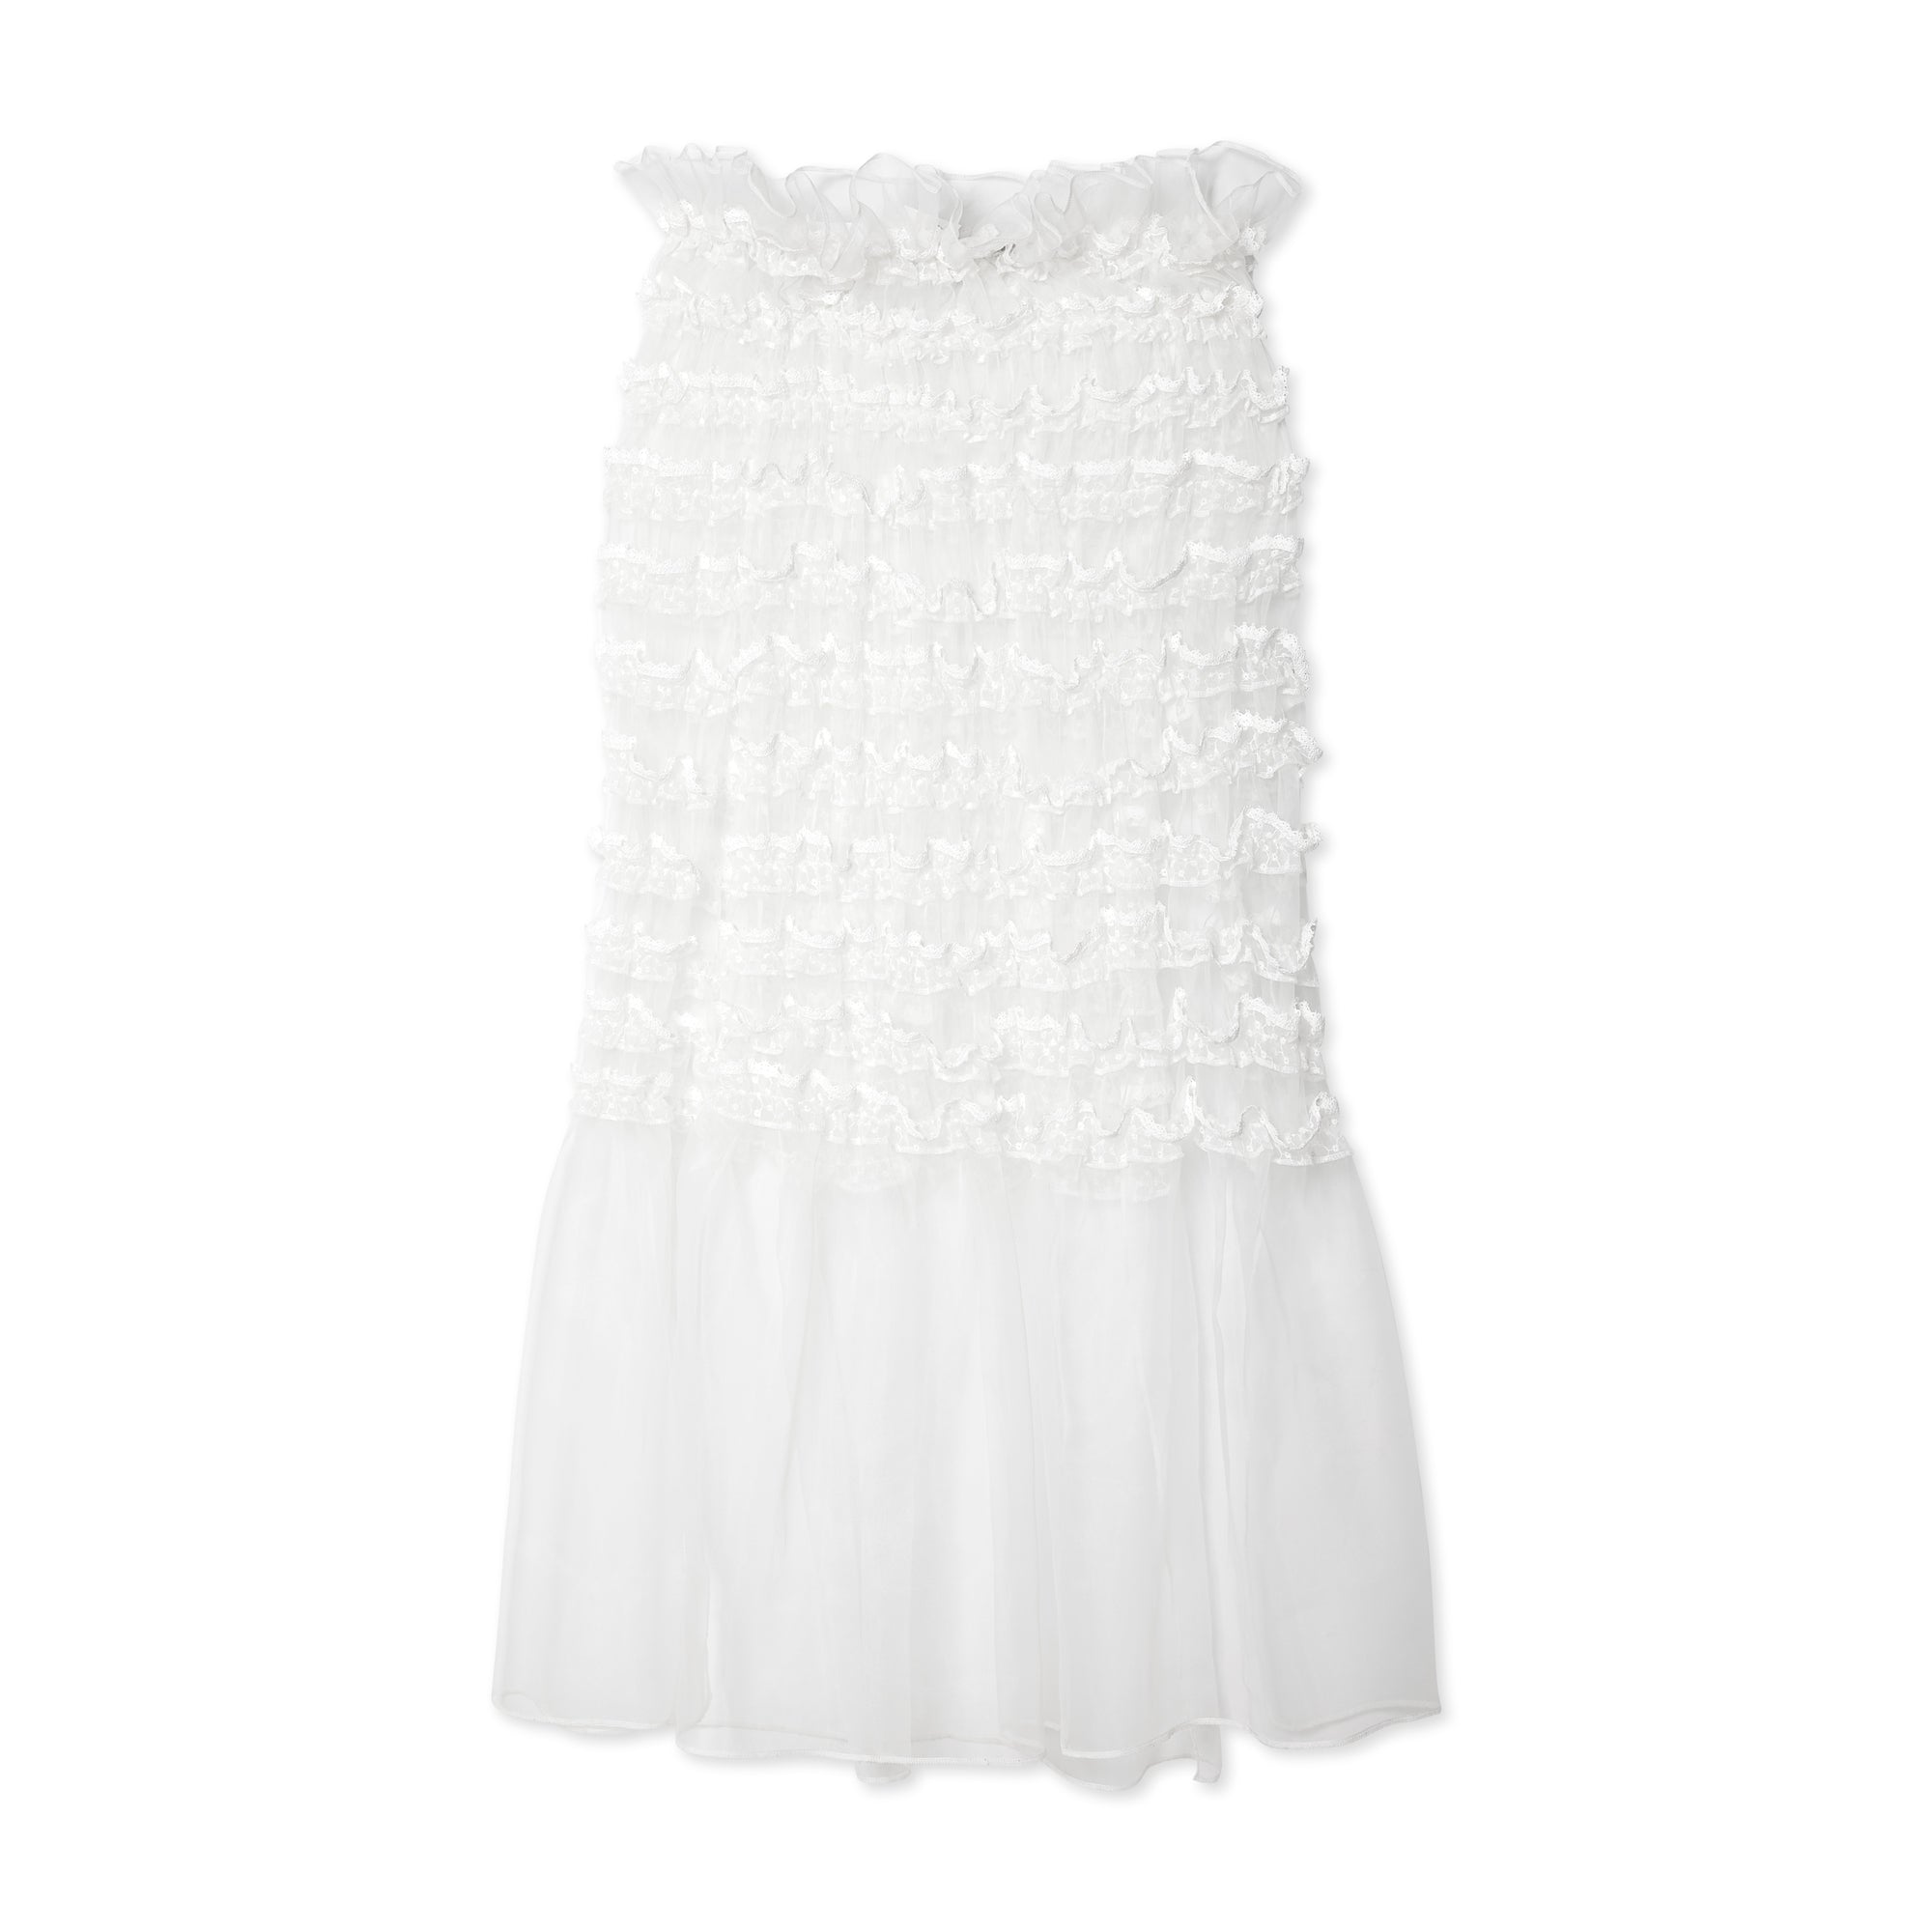 Róisín Pierce - Women's Frosted Broderie Ruffled Cape - (Off White) view 2